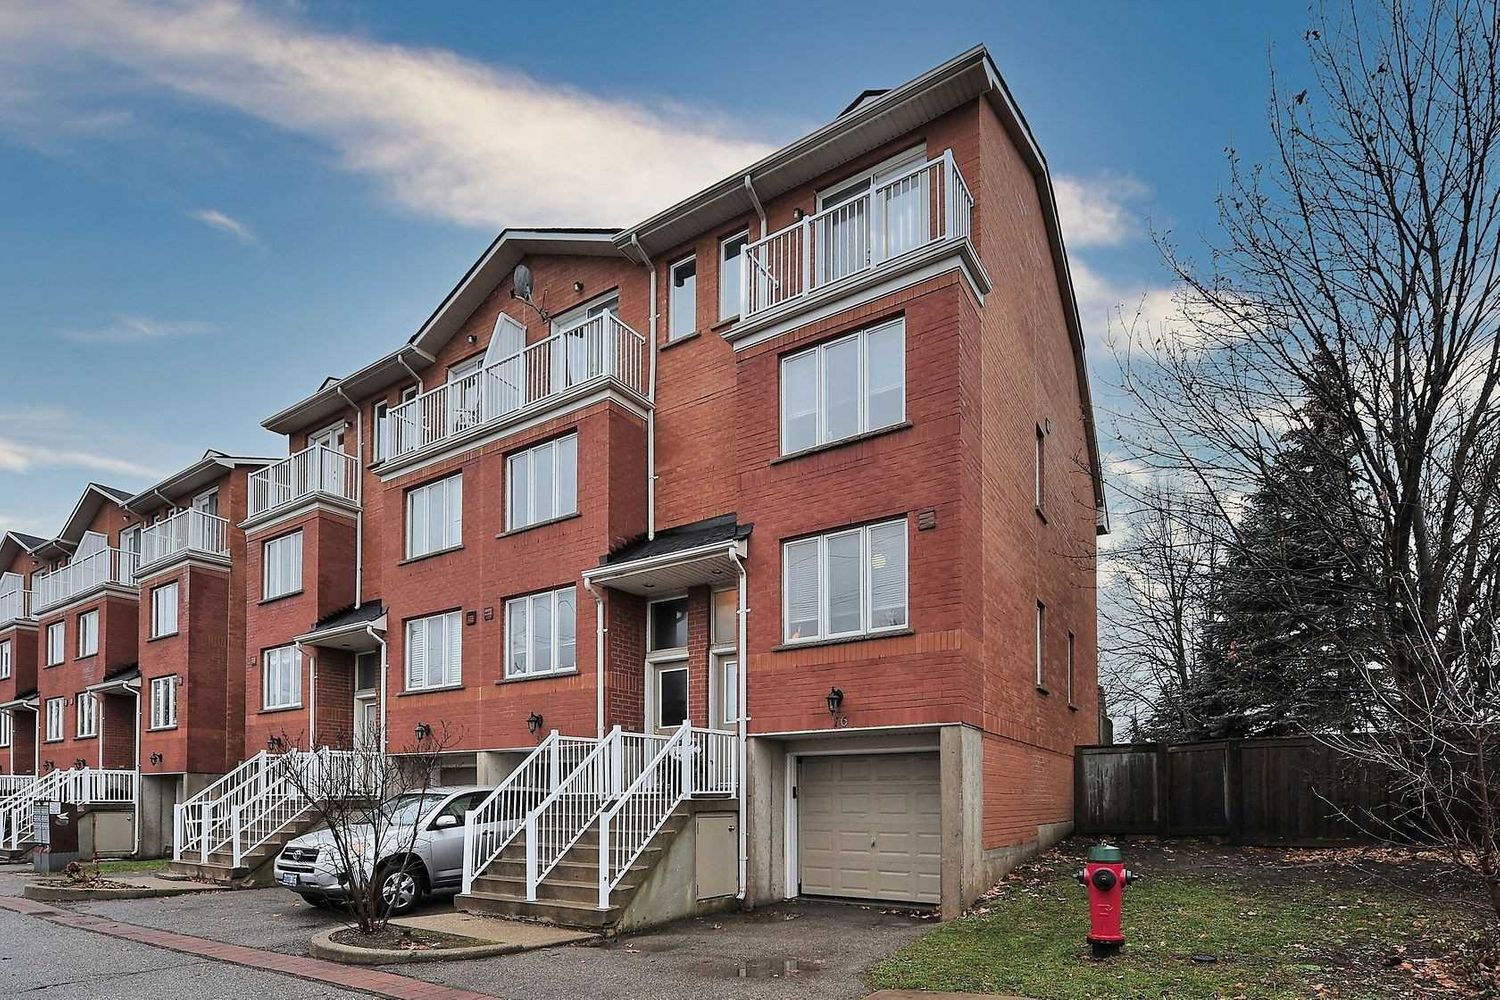 21 Elgin Mills Road W. 21 Elgin Mills Road West Townhomes is located in  Richmond Hill, Toronto - image #1 of 3